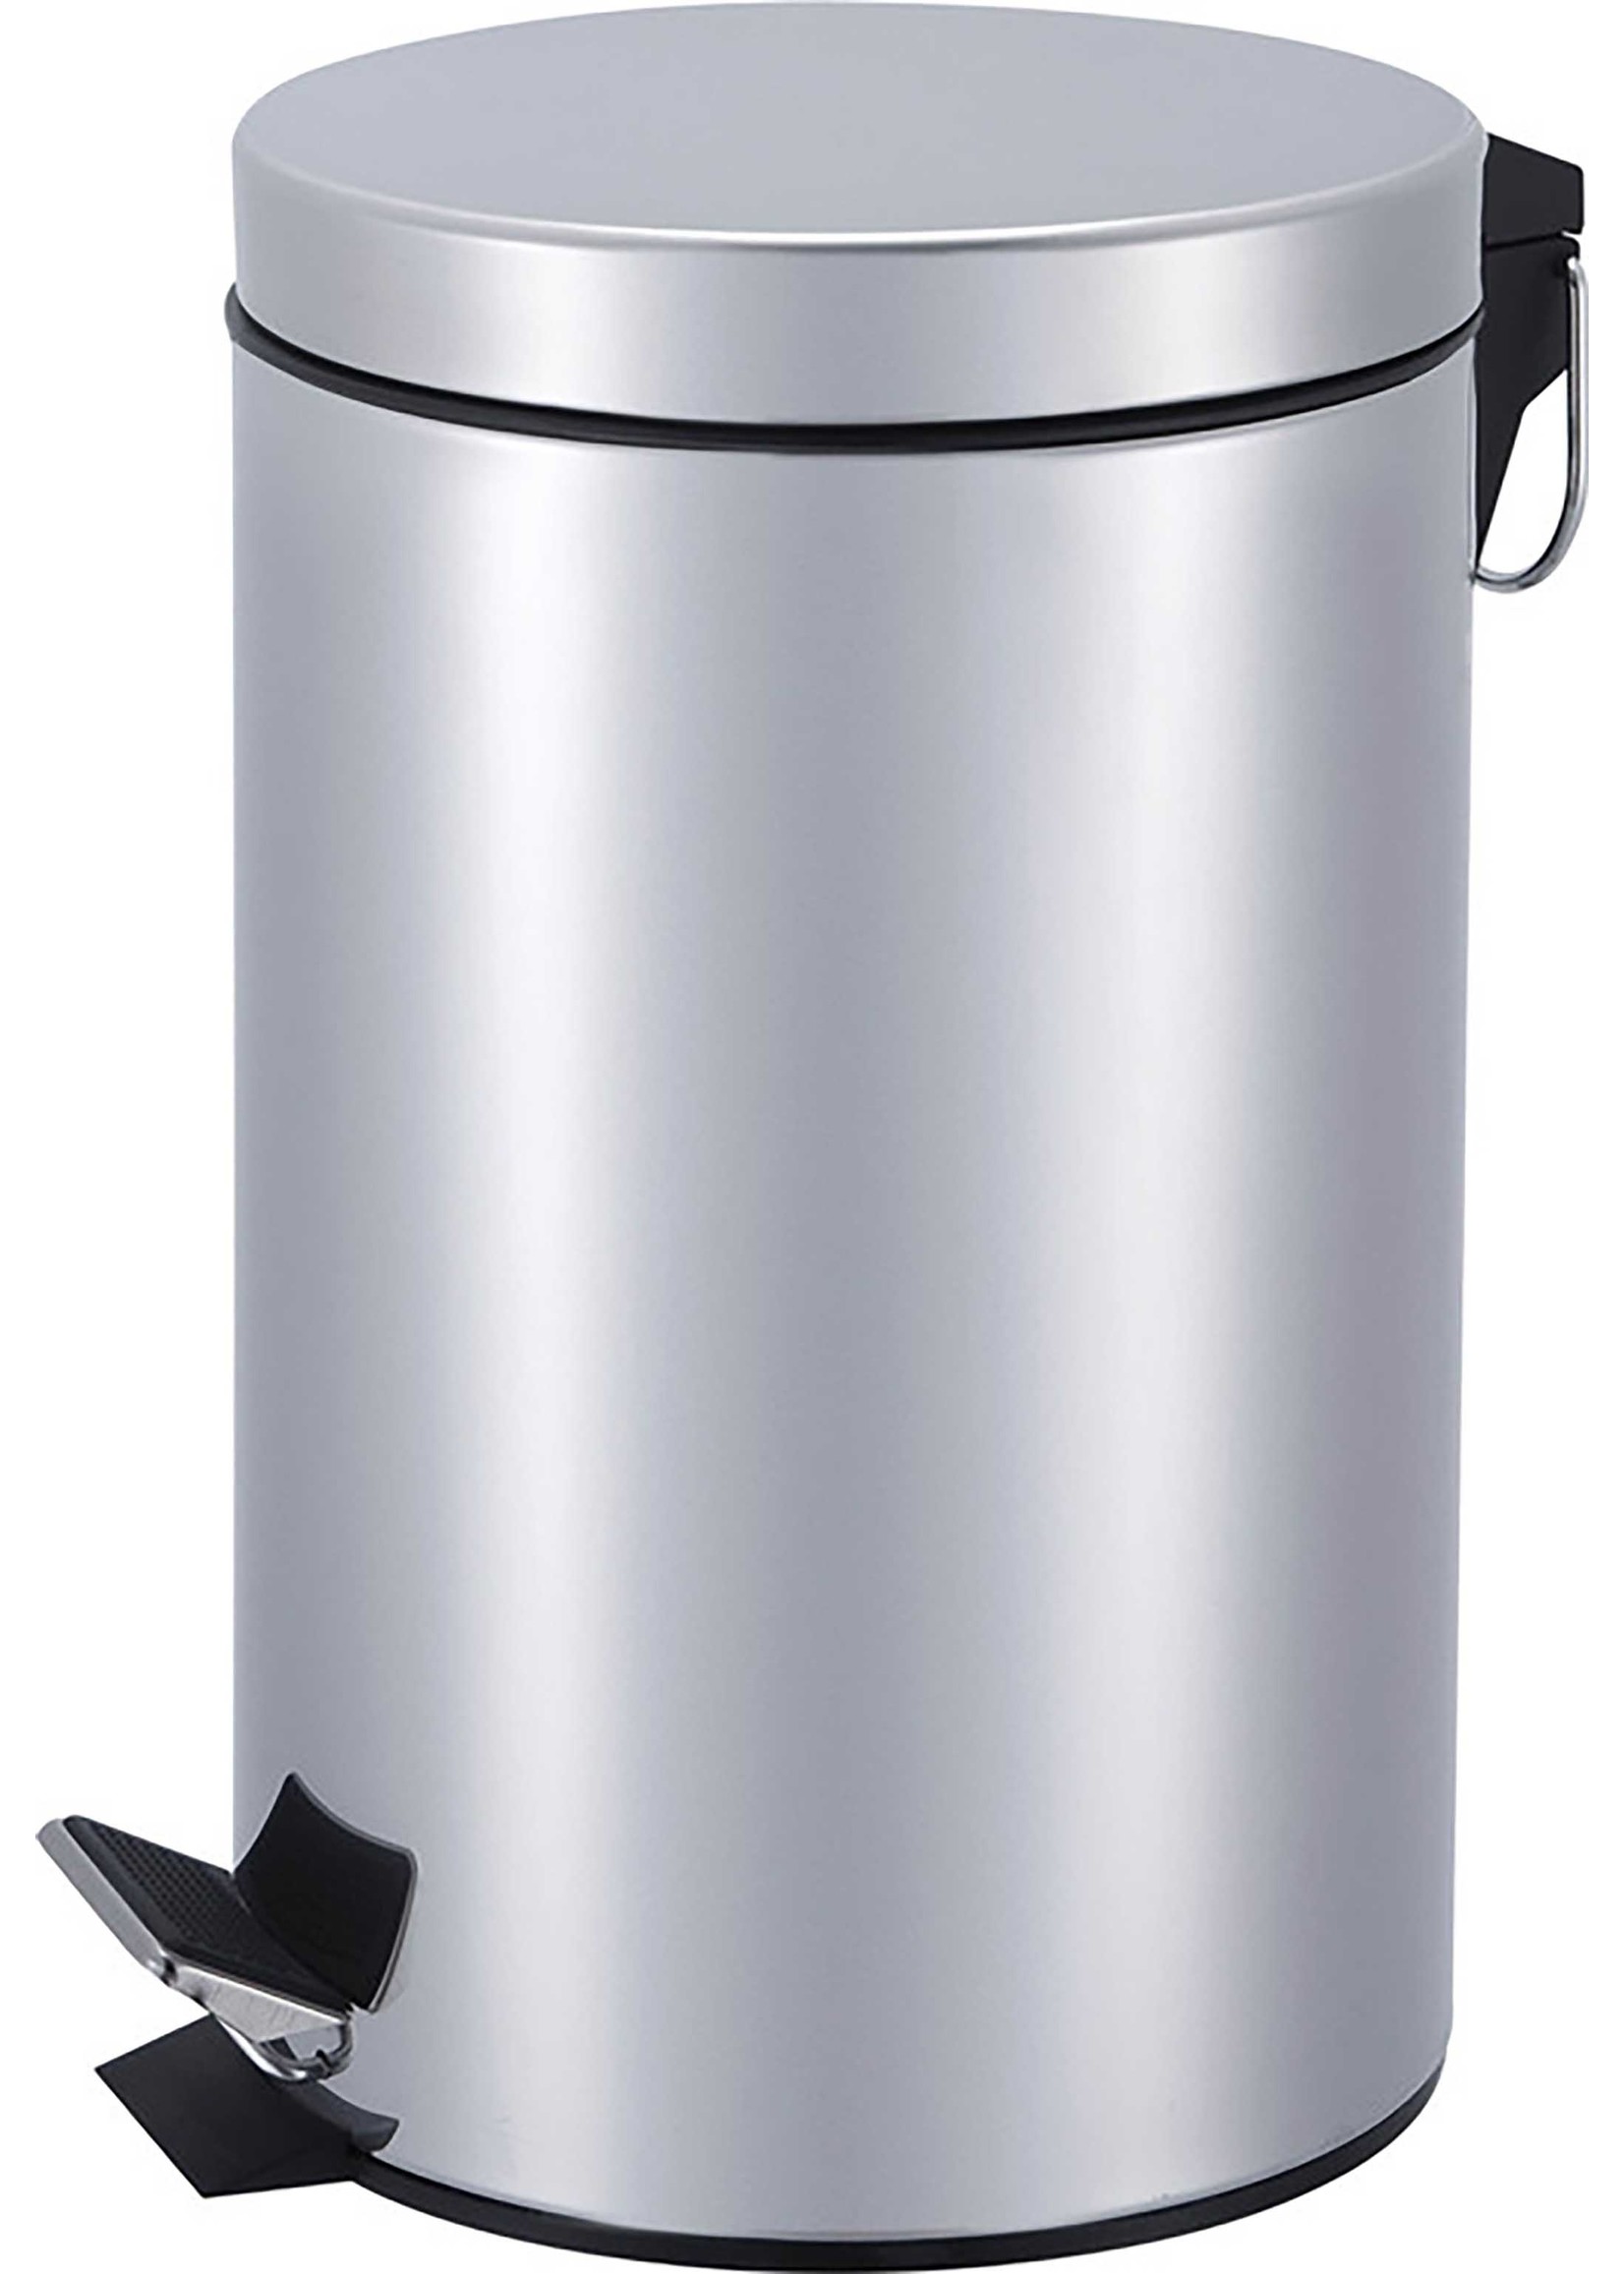 ITY INTERNATIONAL 5L Stainless Steel Trash Step on Can